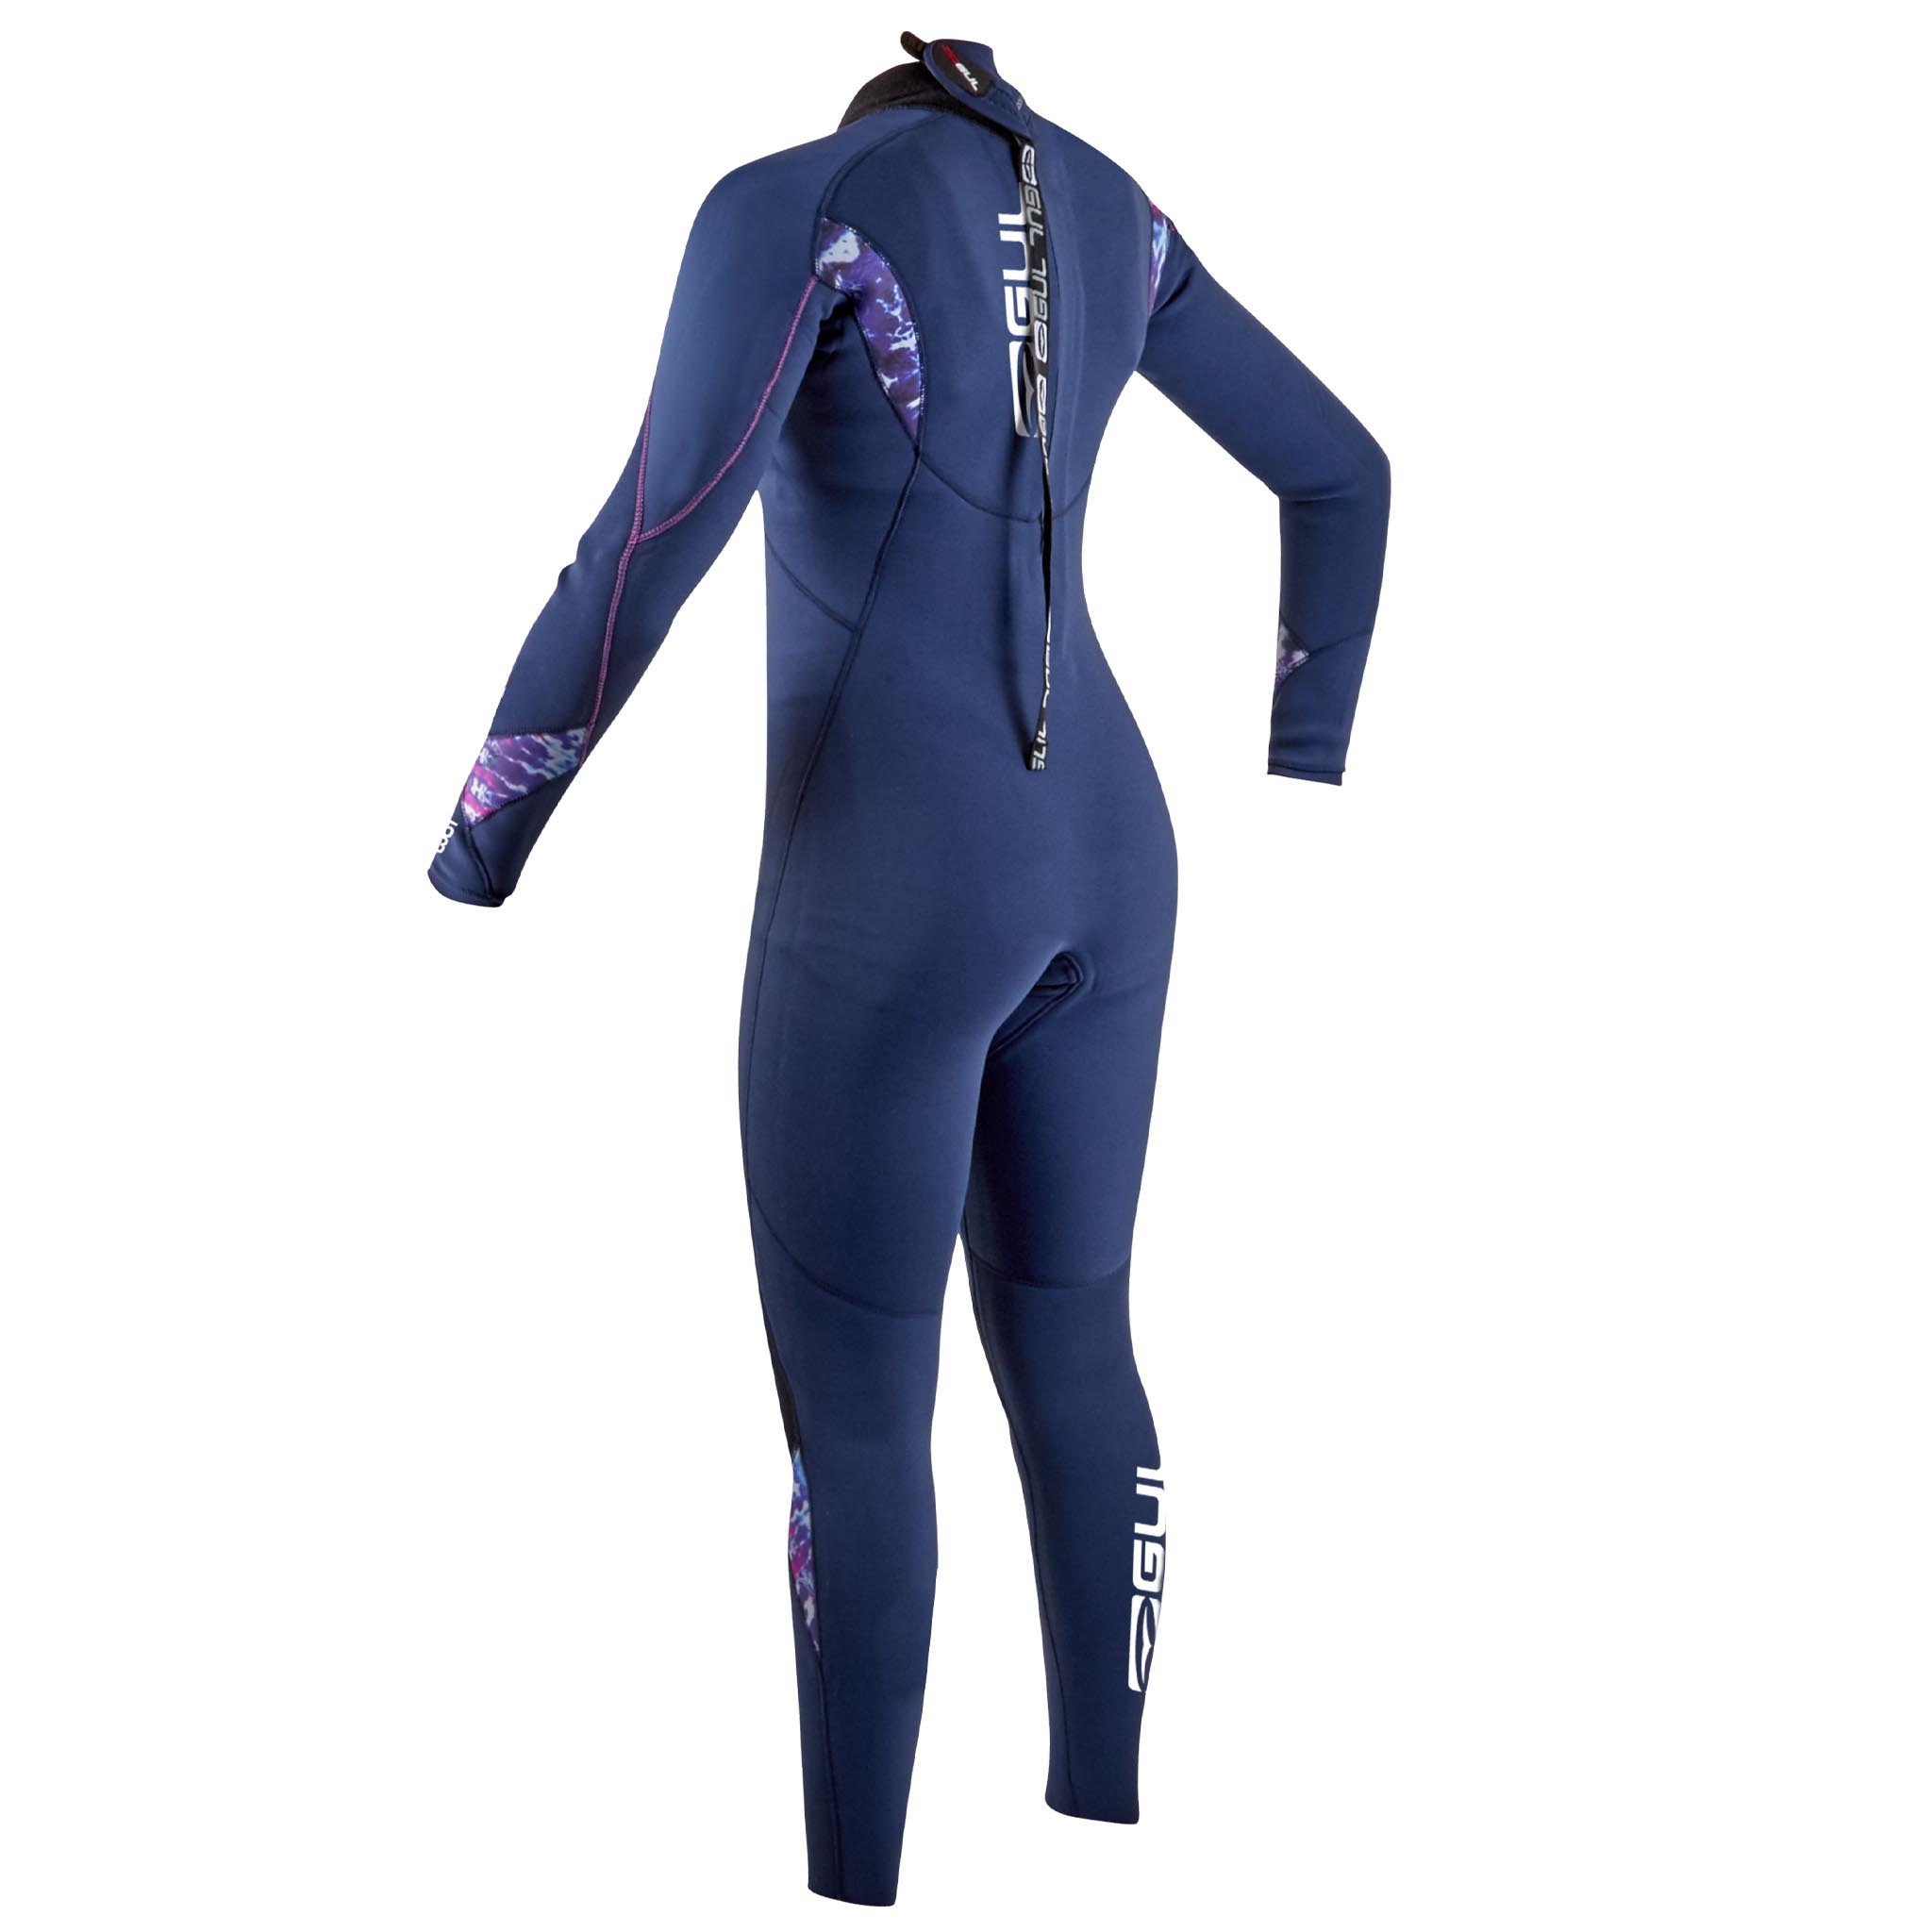 Gul Response Women's 3/2mm Blindstitched Steamer Wetsuit - Back View